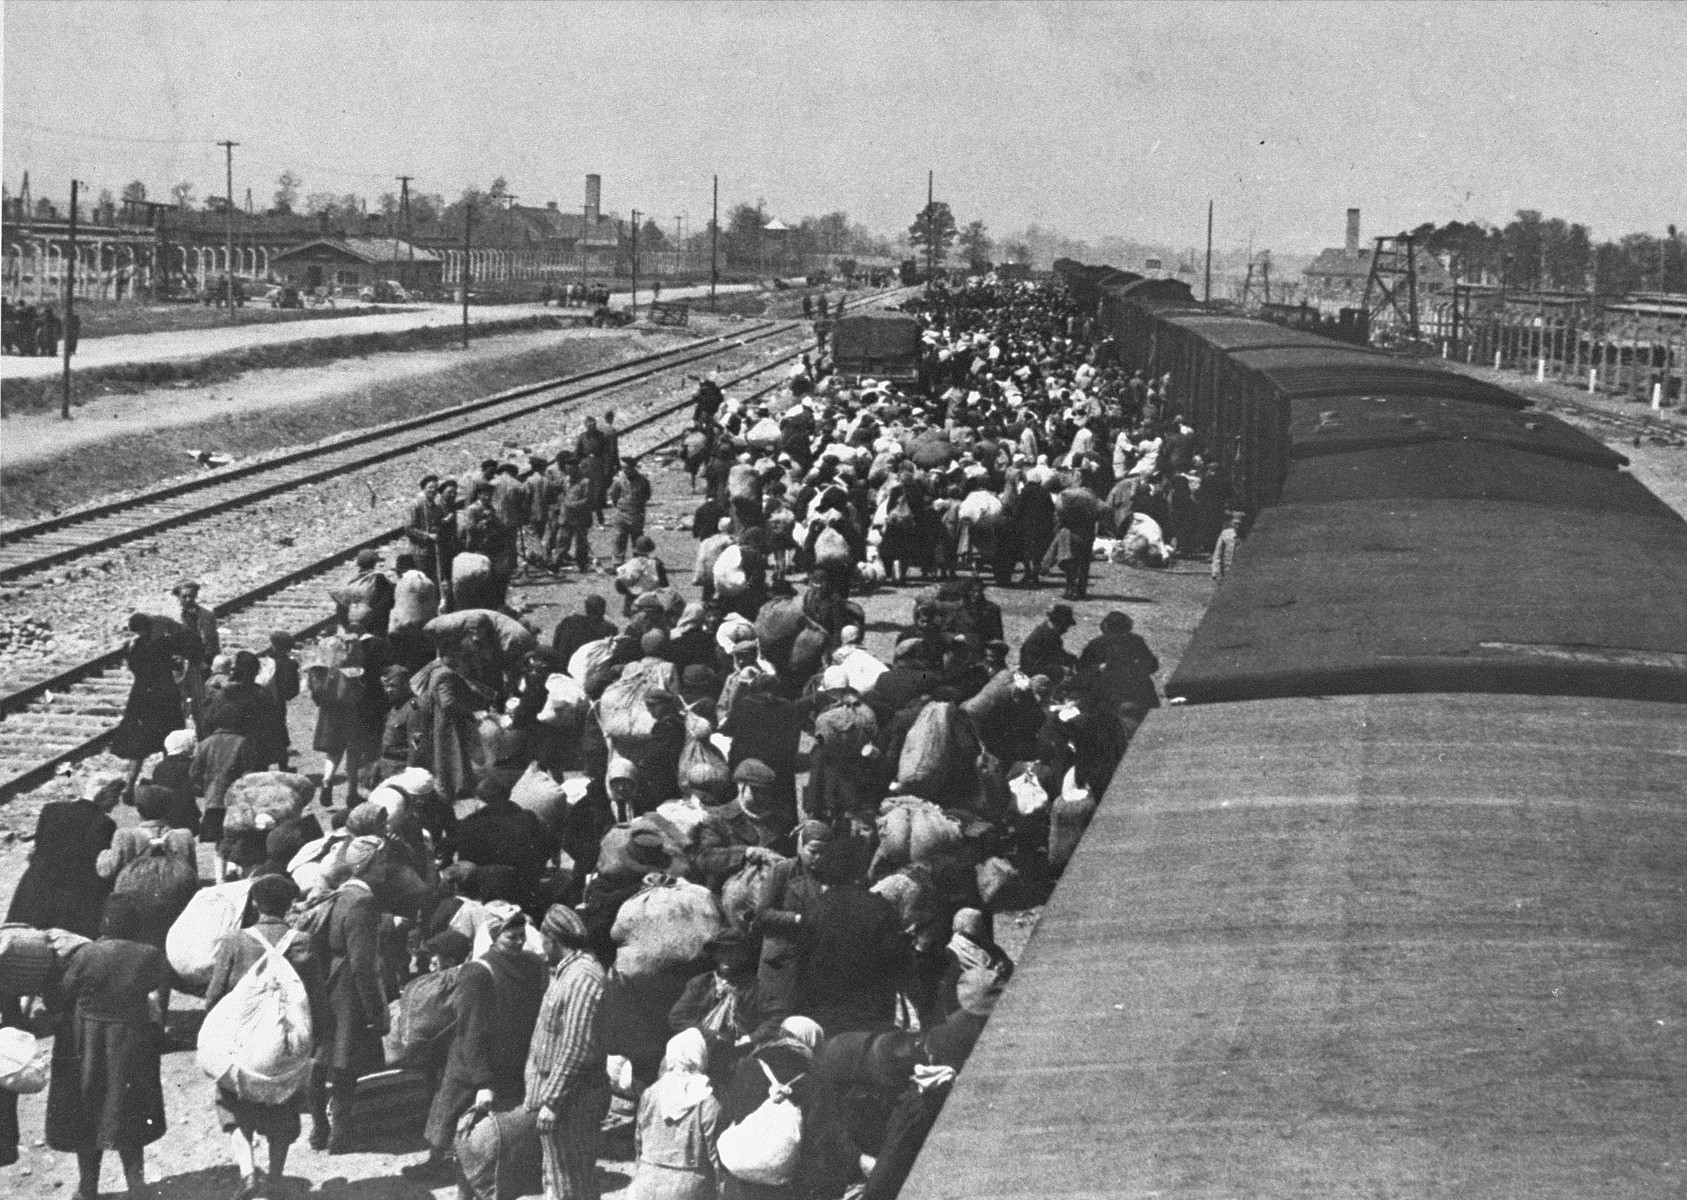 A transport of Jews from Subcarpathian Rus is taken off the trains and assembled on the ramp at Auschwitz-Birkenau.

Pictured in the front is Heinrich Preiss, a member of the Kanada kommando.